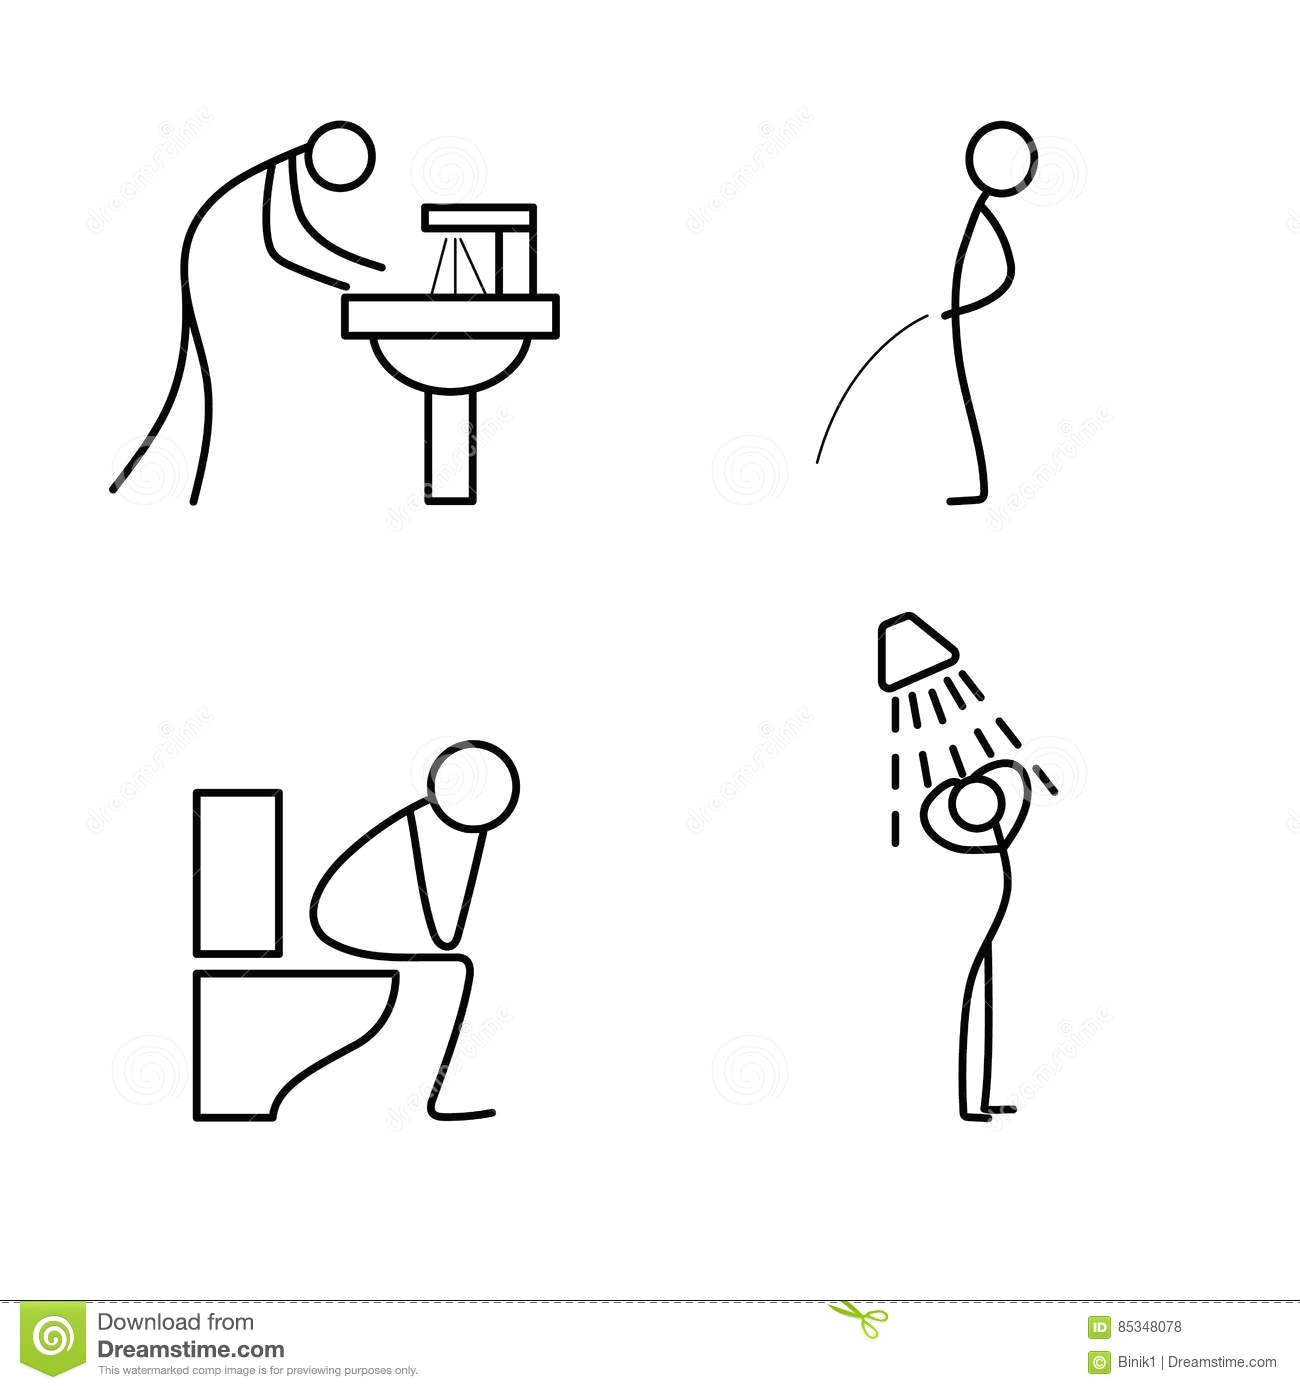 Drawing Cartoons Basic Cartoon Icon Of Sketch Stick Figure Doing Life Routine Download